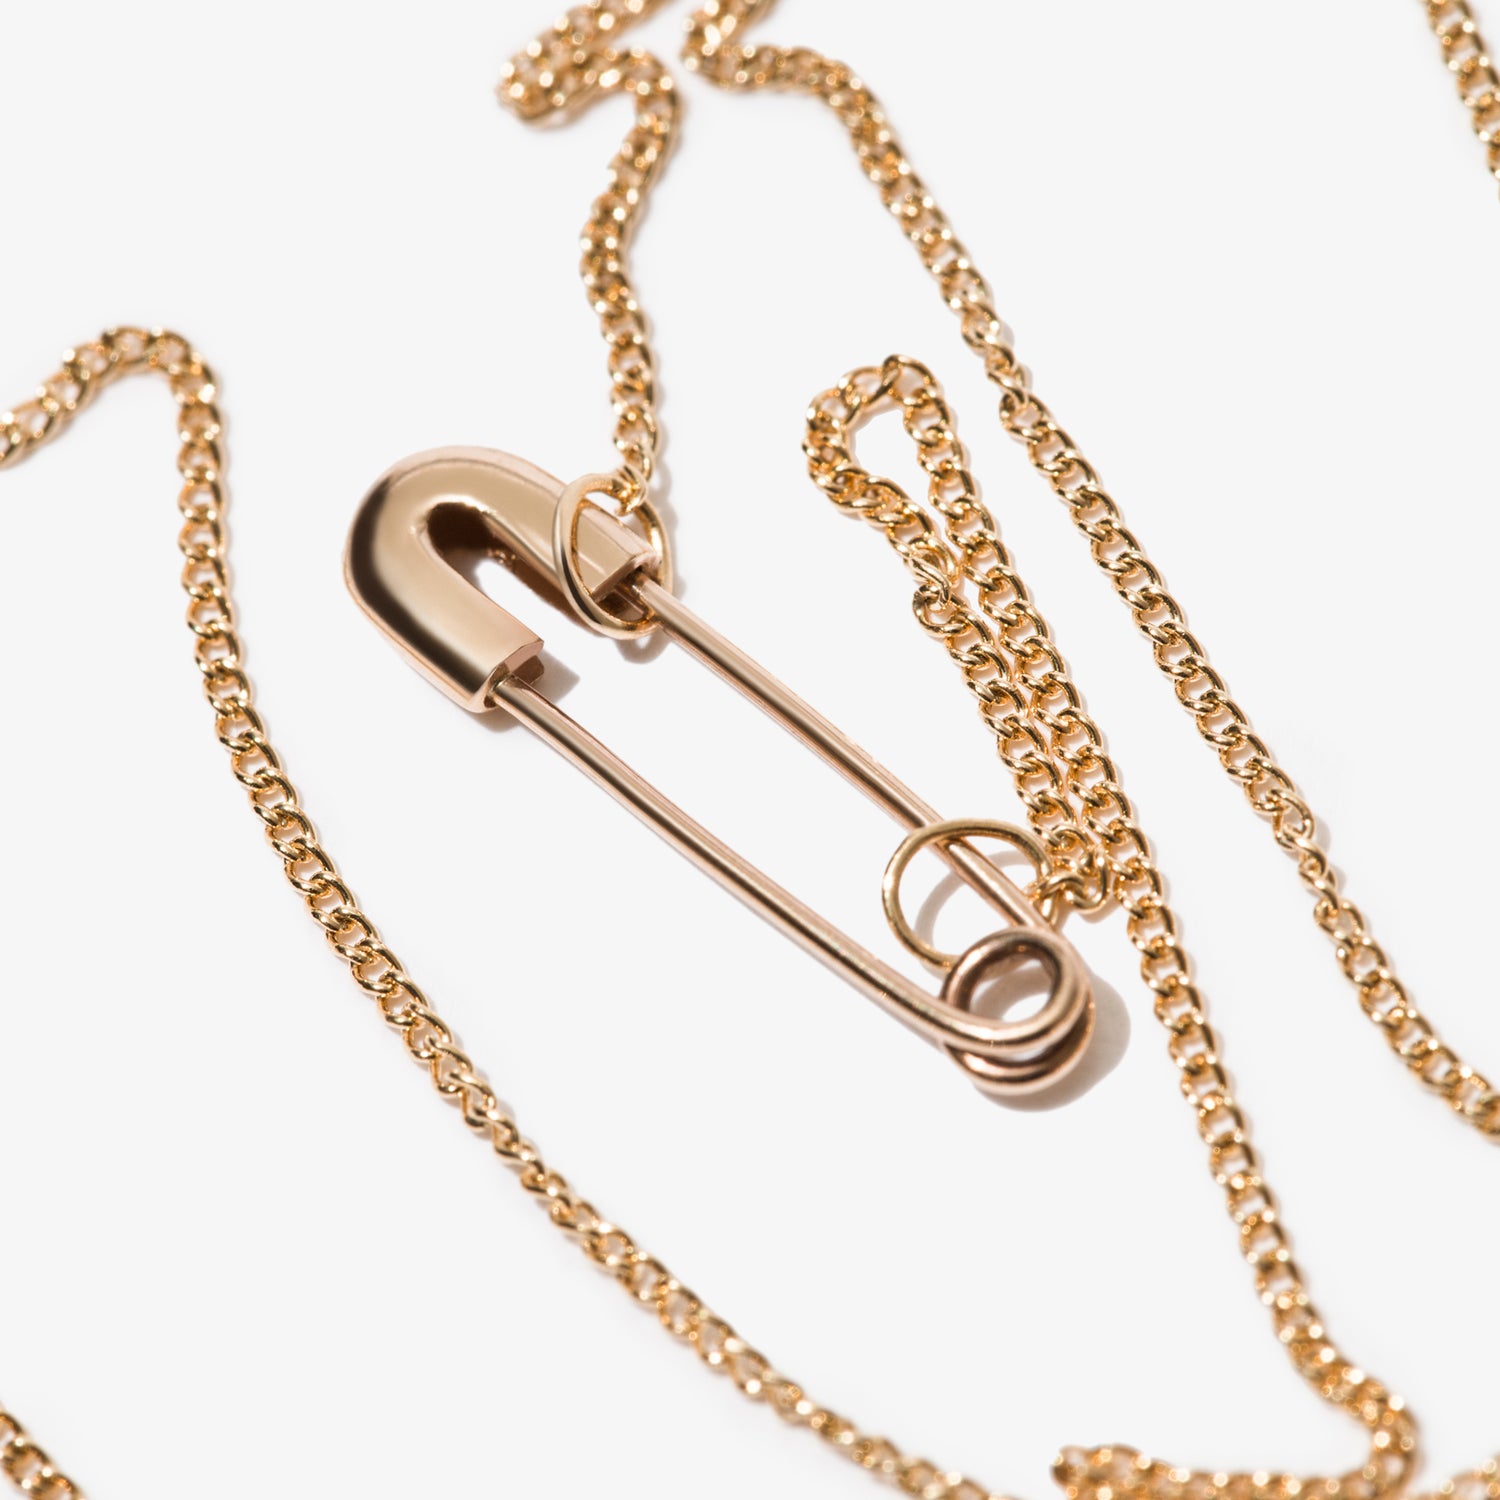 Safety Pin Necklace – Gala is Love